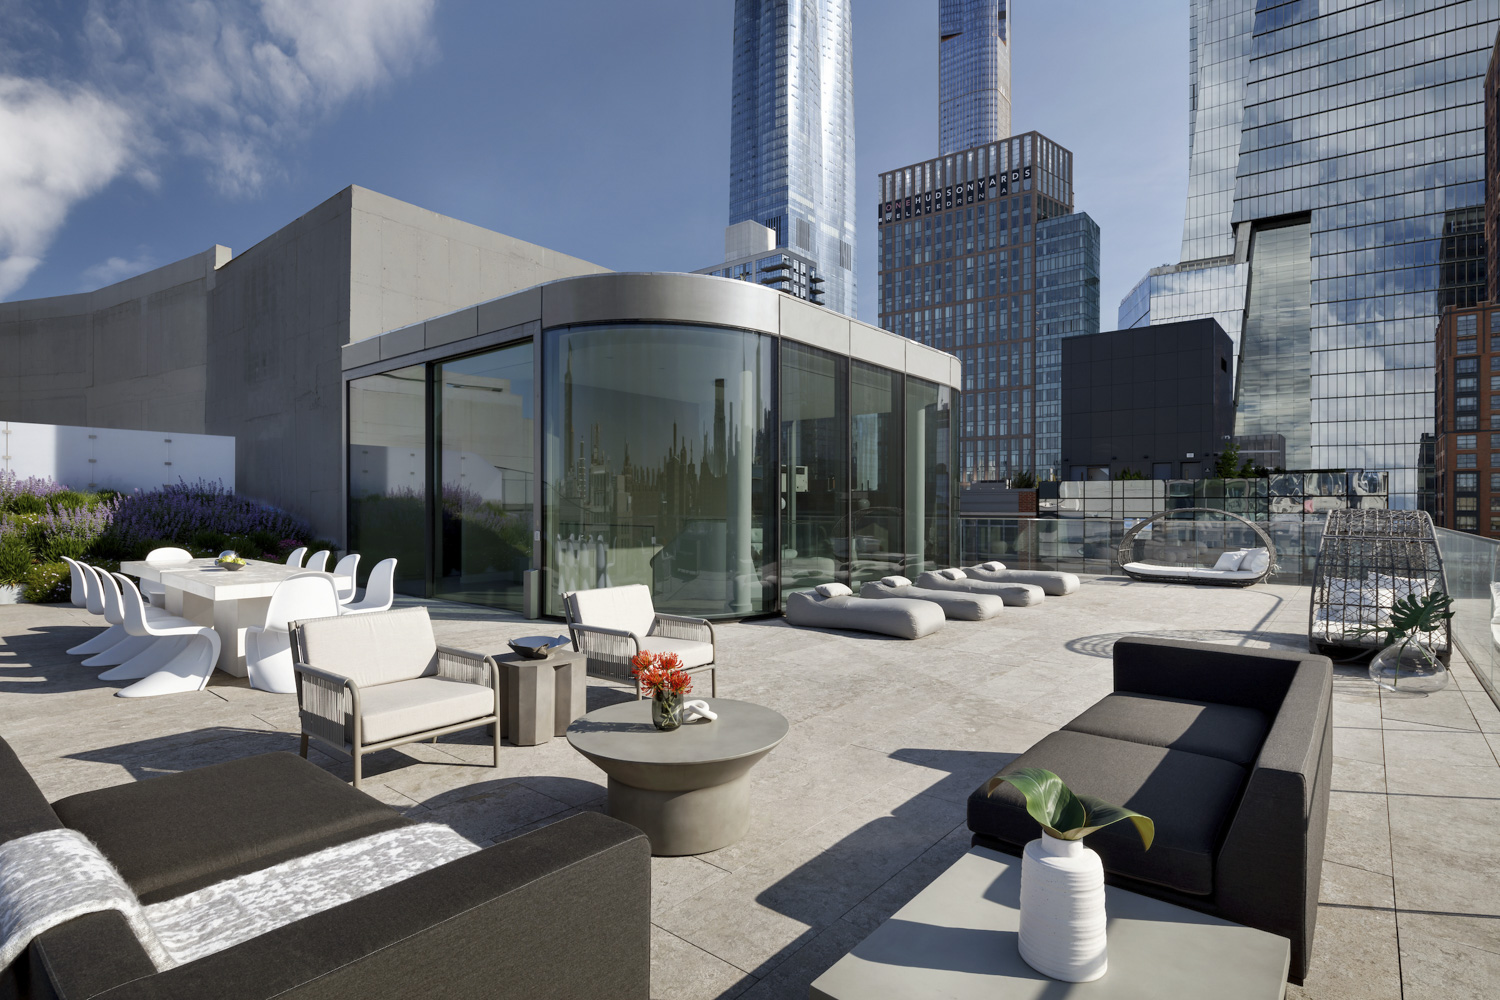 zaha hadid manhattan penthouse for sale 2019 05 22 colinmiller 520w28 1 13